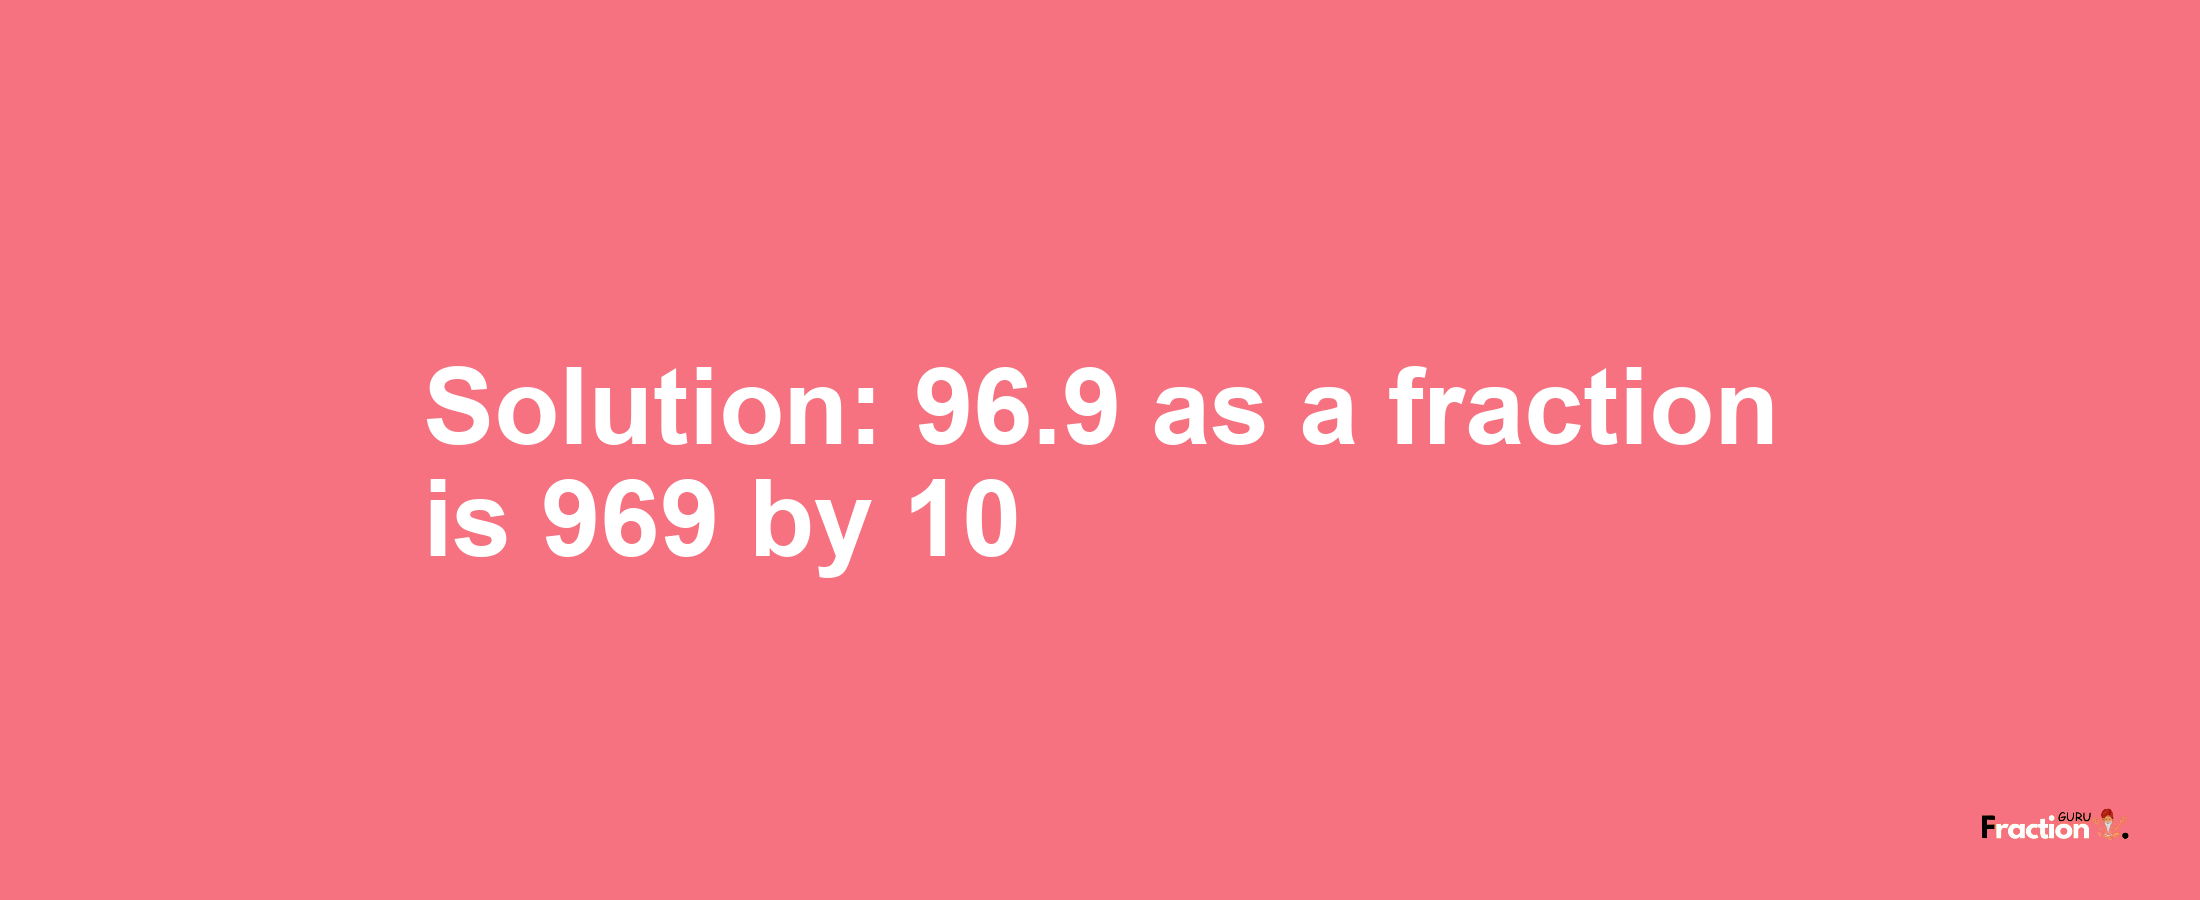 Solution:96.9 as a fraction is 969/10